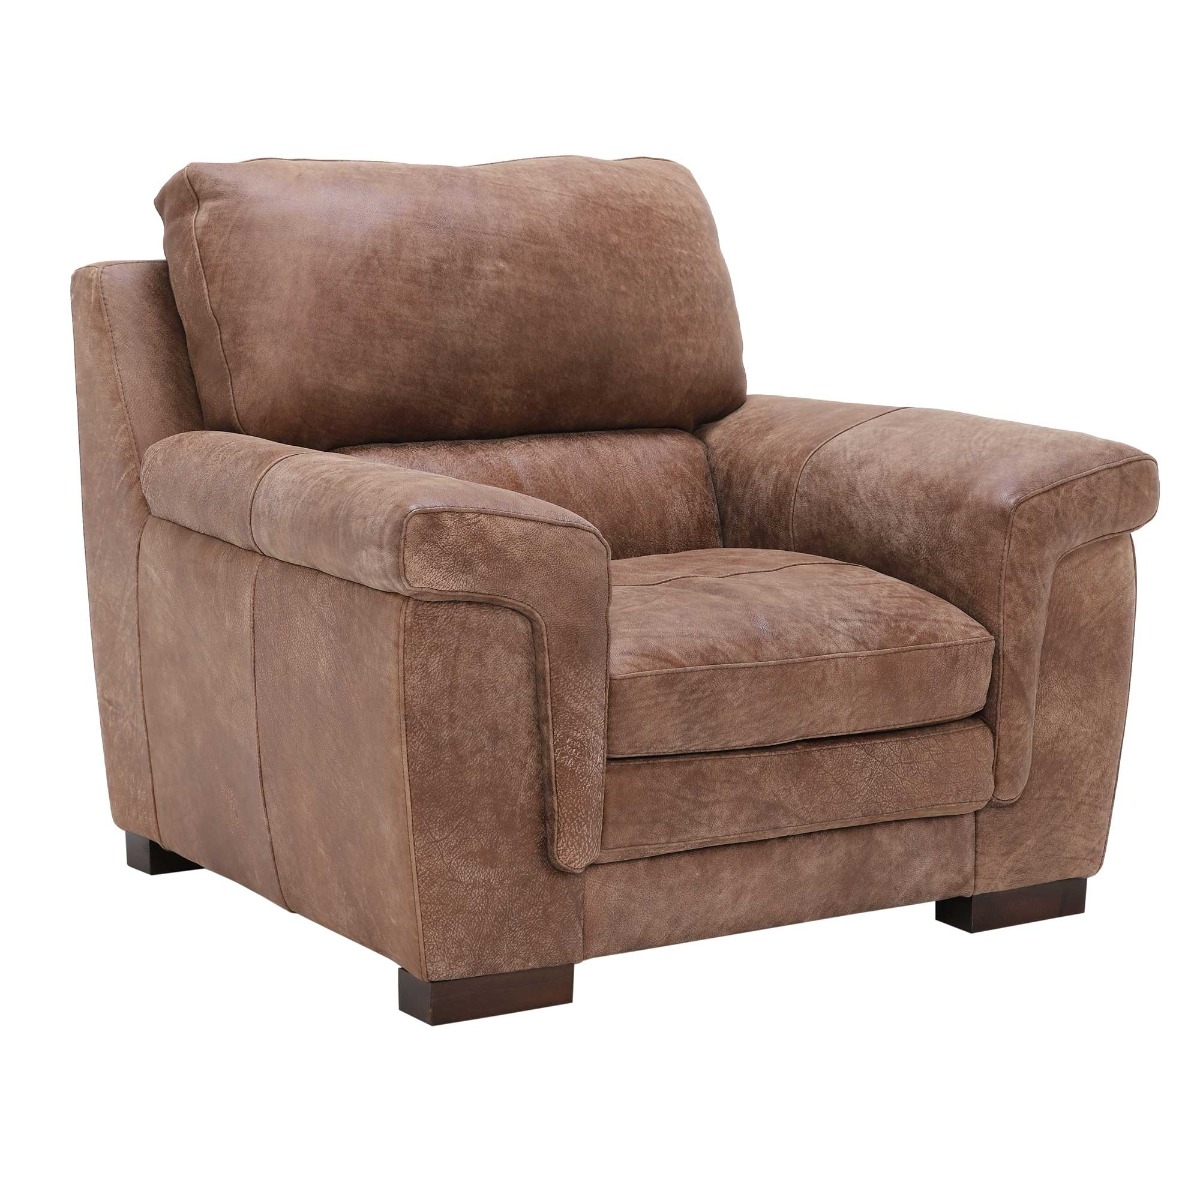 Berisso Armchair, Brown Leather | Barker & Stonehouse